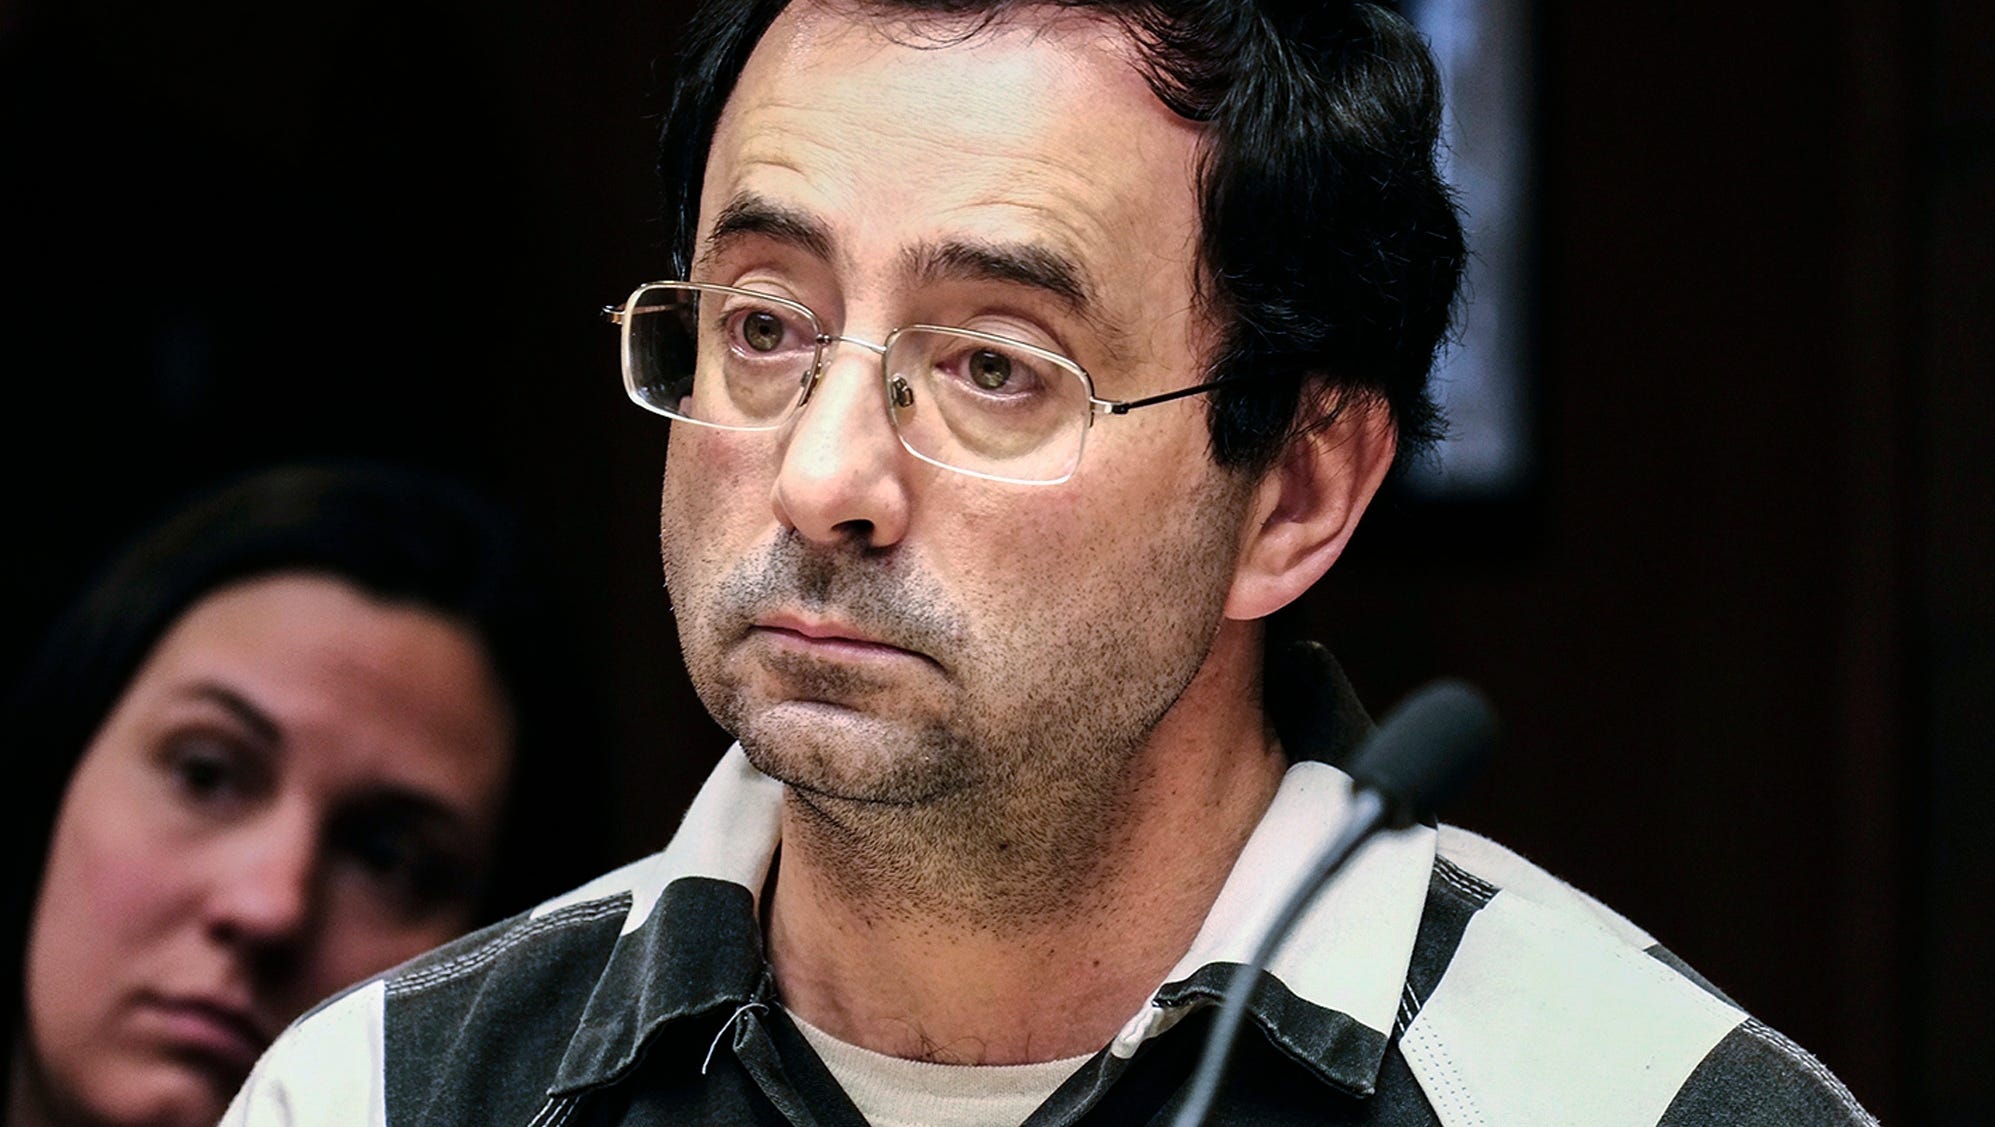 Dr. Larry Nassar listens to testimony of a witness during a preliminary hearing in Lansing, Michigan. Nassar, a former Michigan State University and USA Gymnastics sports doctor, is taking a step toward resolving one of four criminal cases against him.